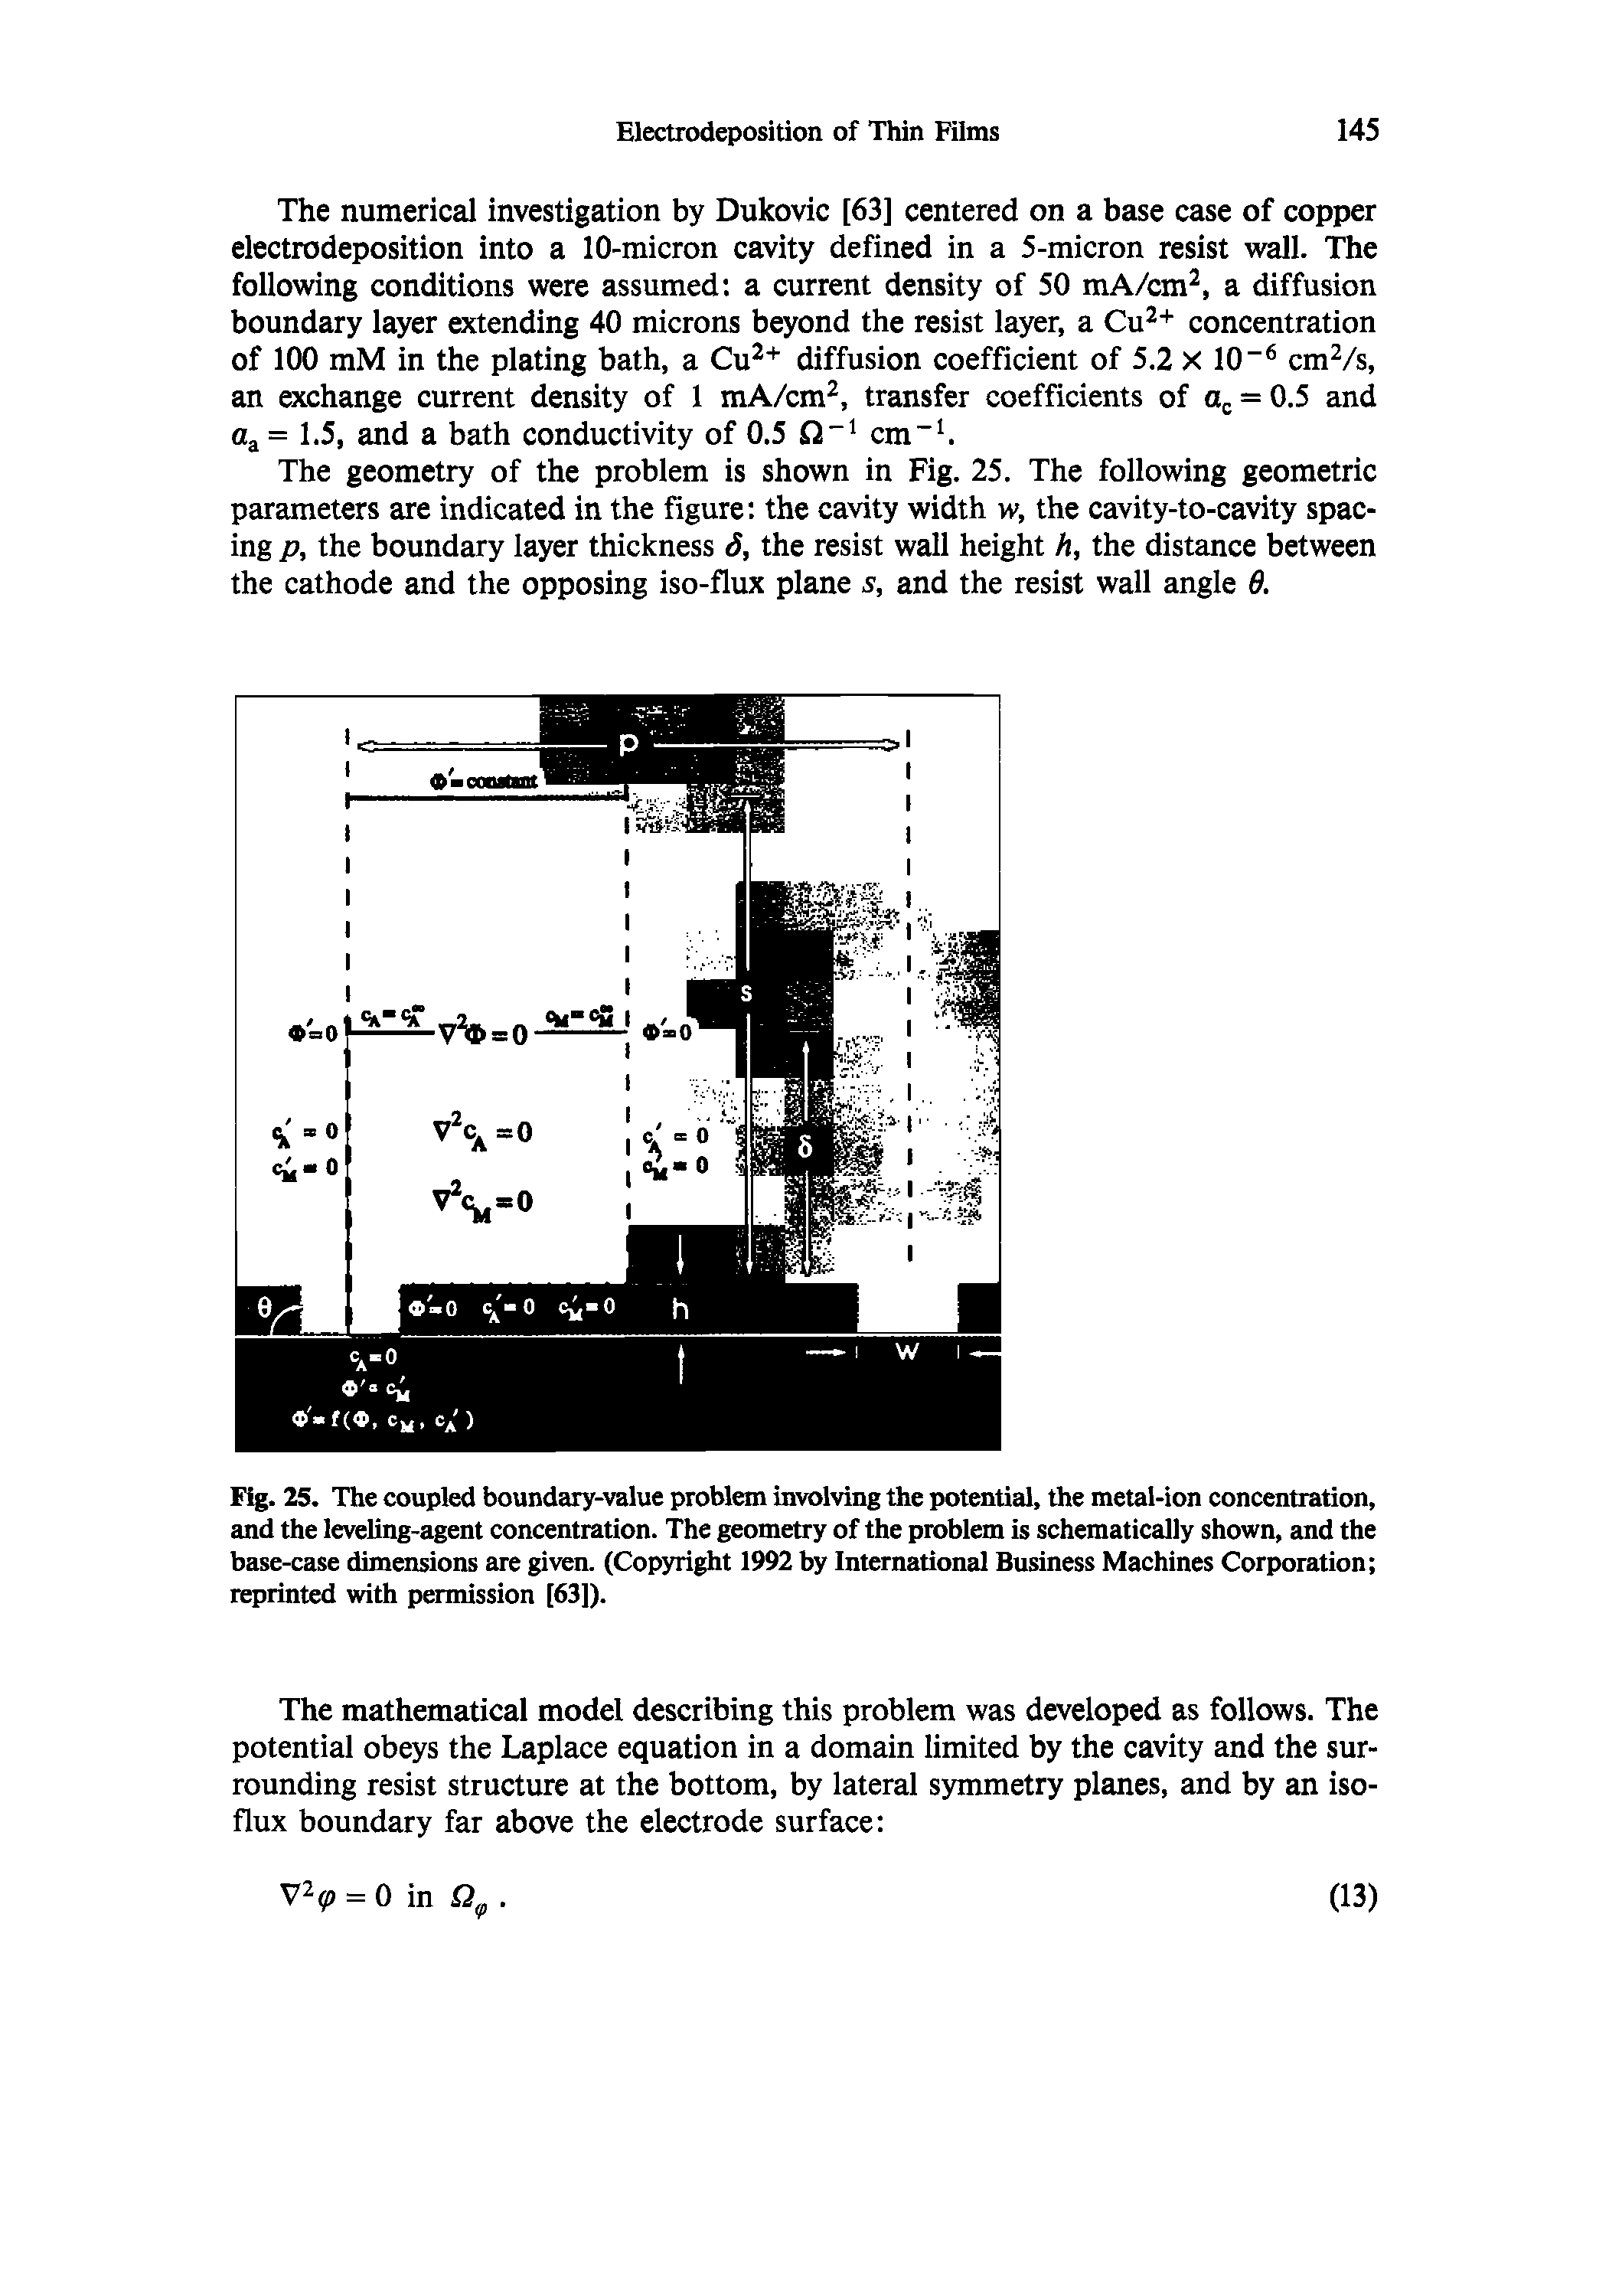 Fig. 25. The coupled boundary-value problem involving the potential, the metal-ion concentration, and the leveUng-agent concentration. The geometry of the problem is schematically shown, and the base-case dimensions are given. (Copyright 1992 by International Business Machines Corporation reprinted with permission [63]).